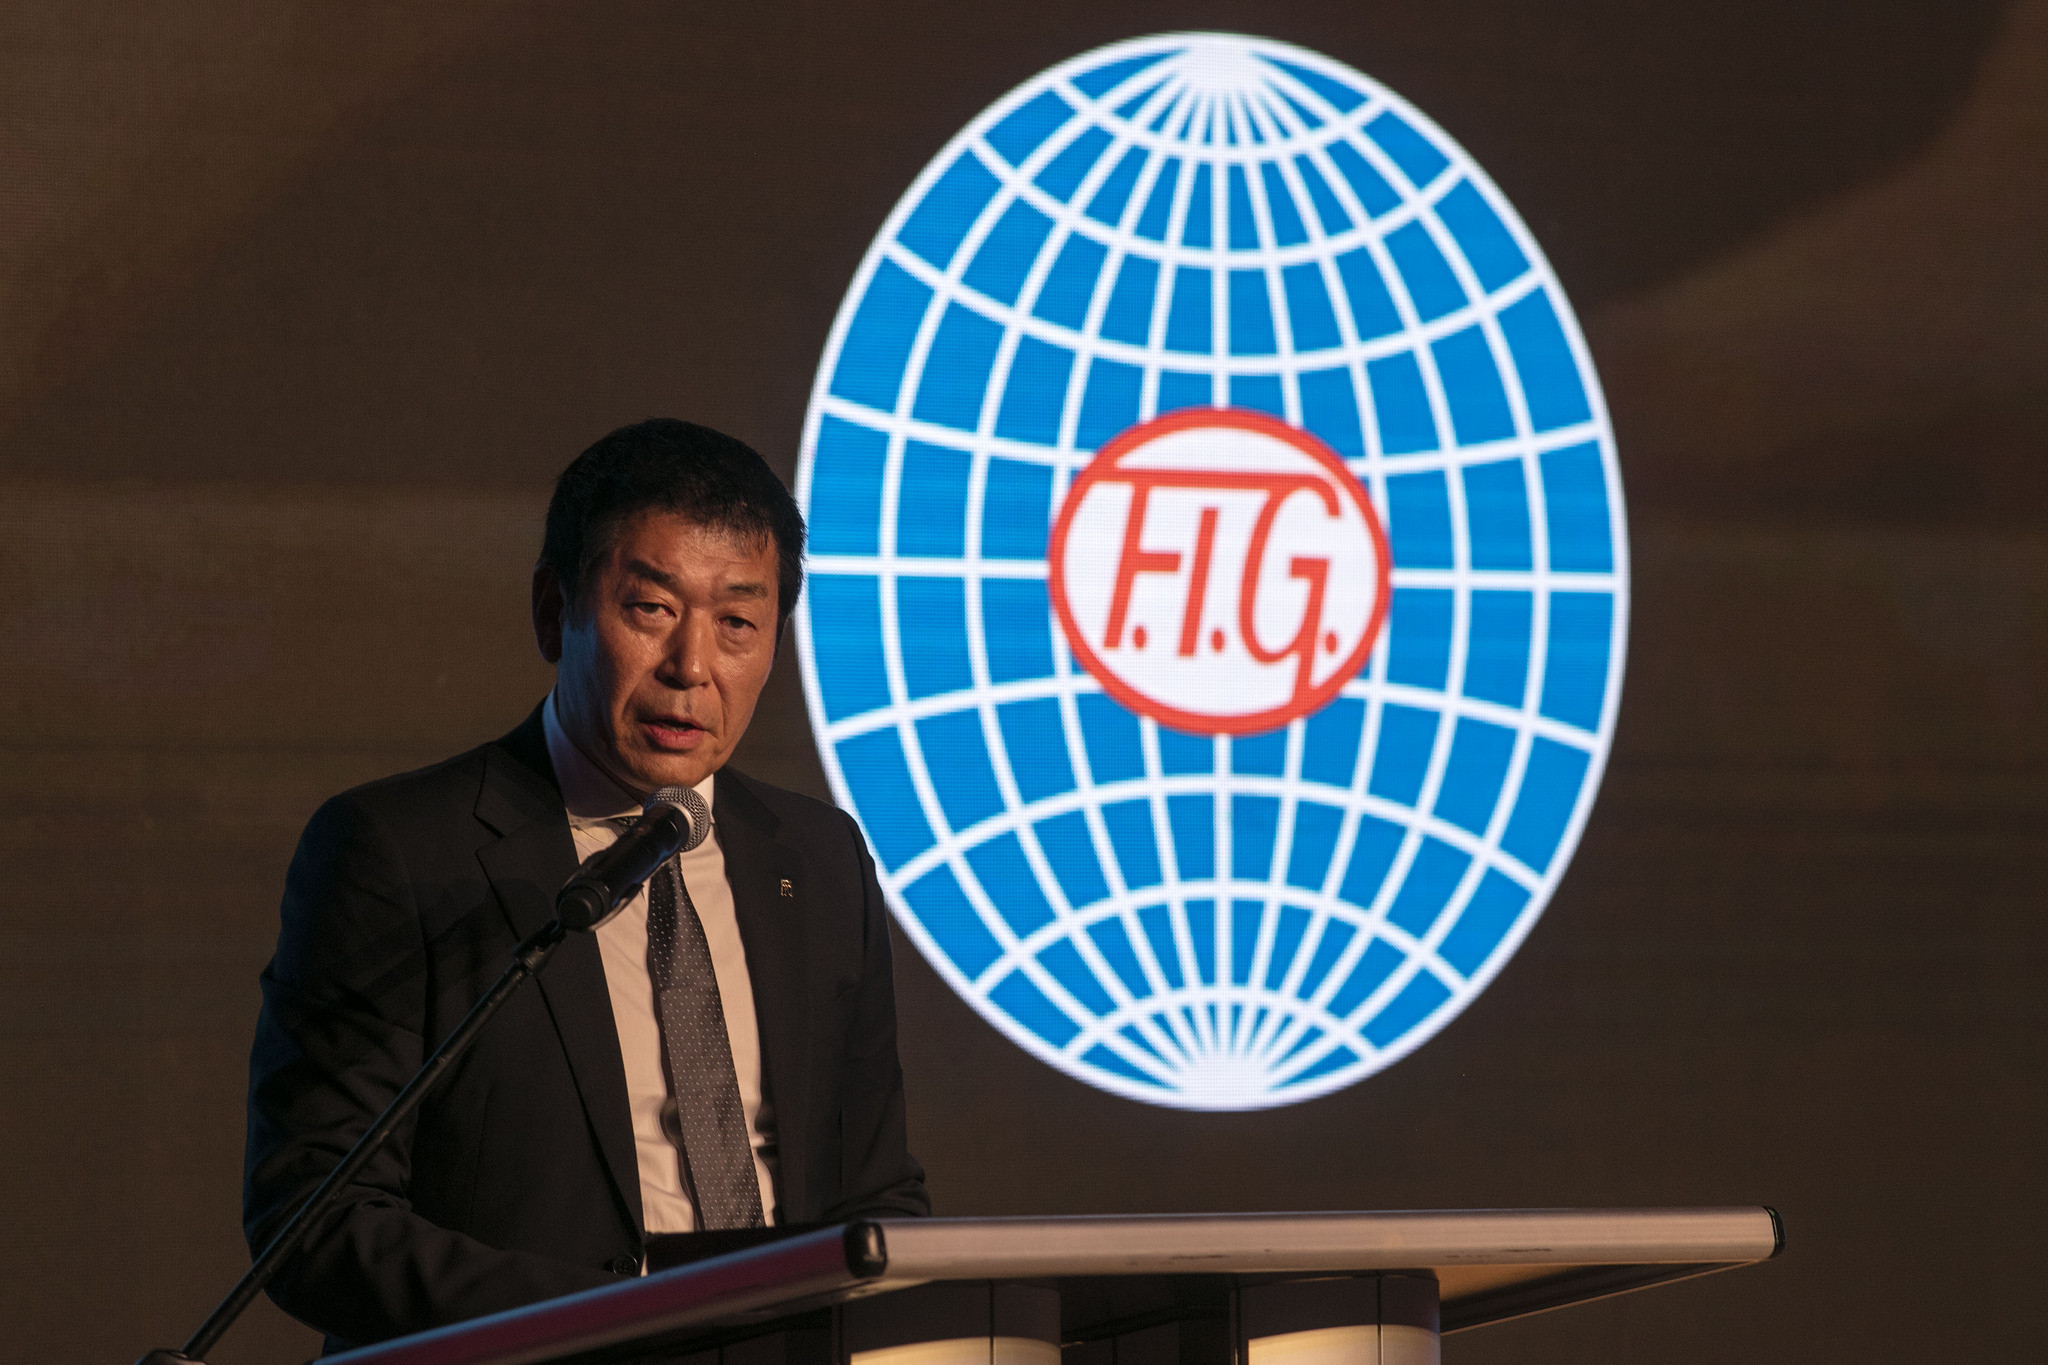 FIG President Morinari Watanabe was among the speakers at the forum ©IOC